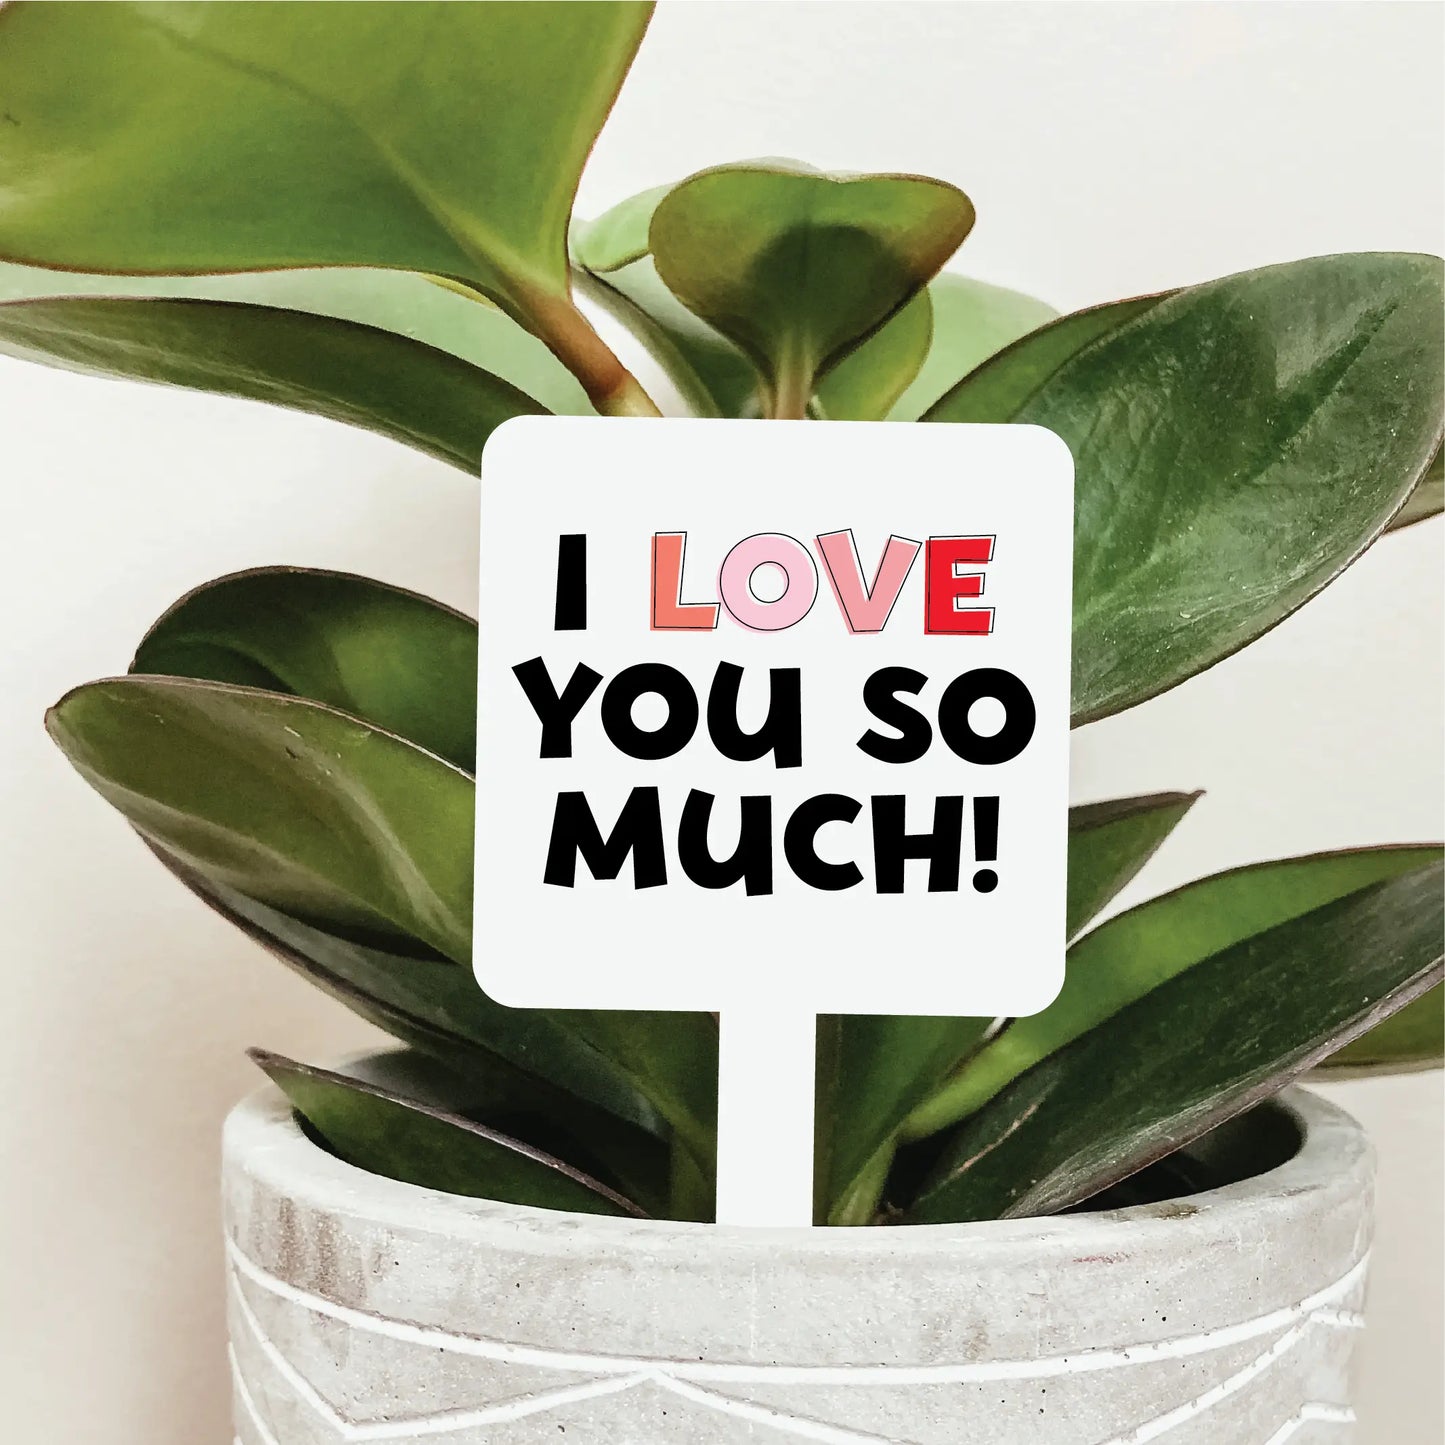 KDC - I love you so much - Plant Marker